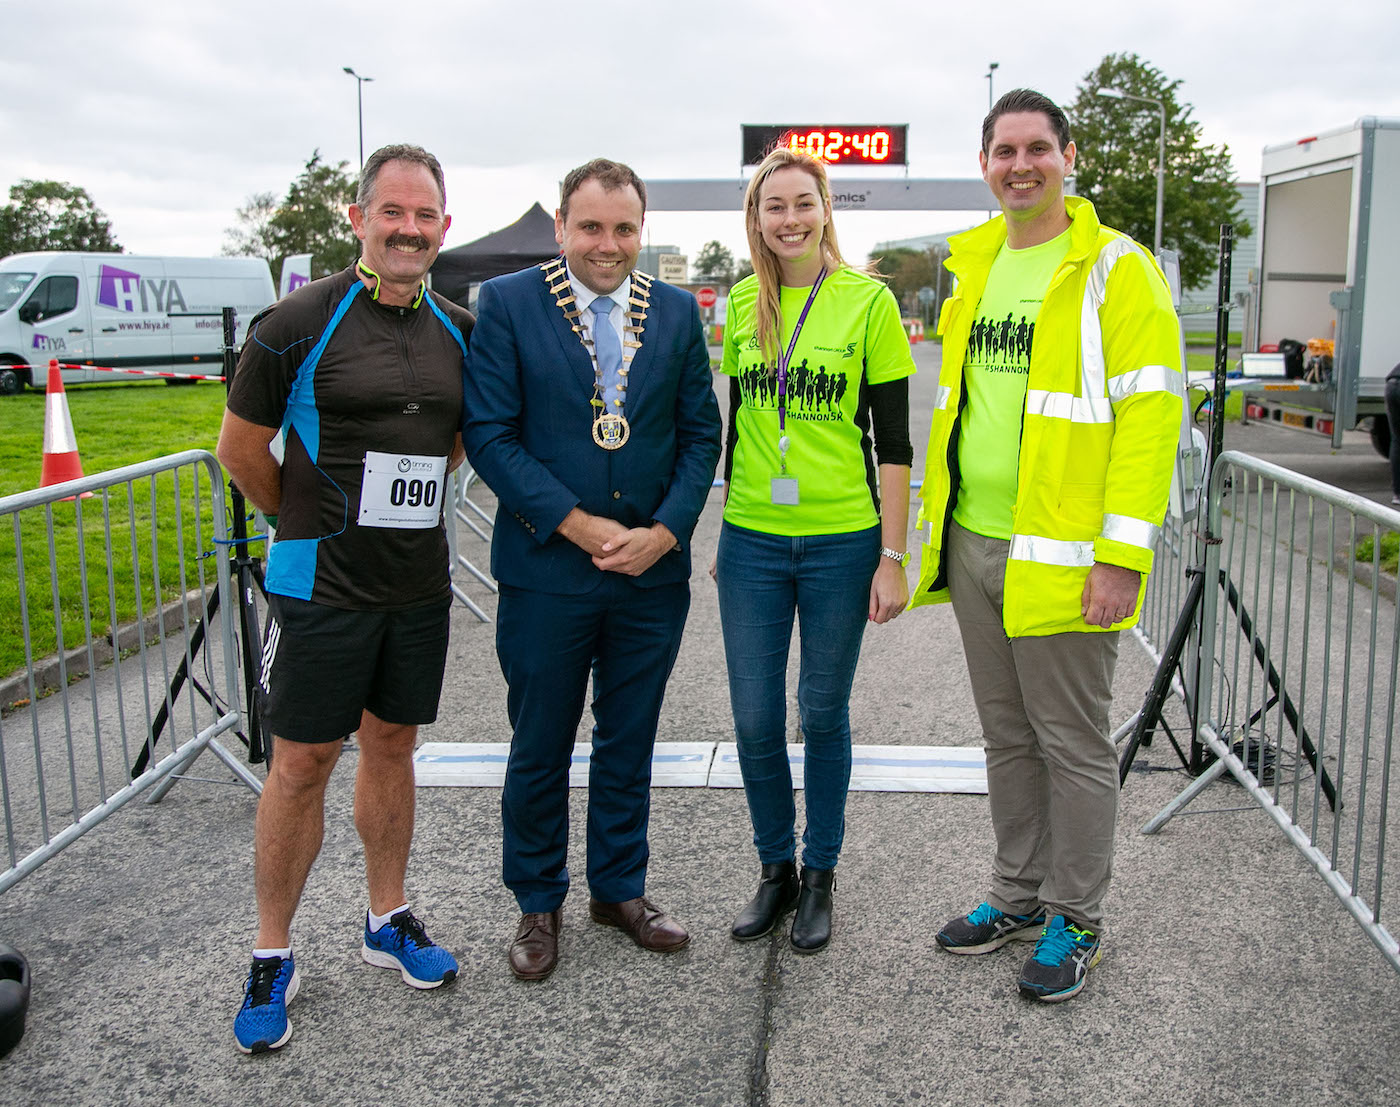 Shannon Group charity 5k